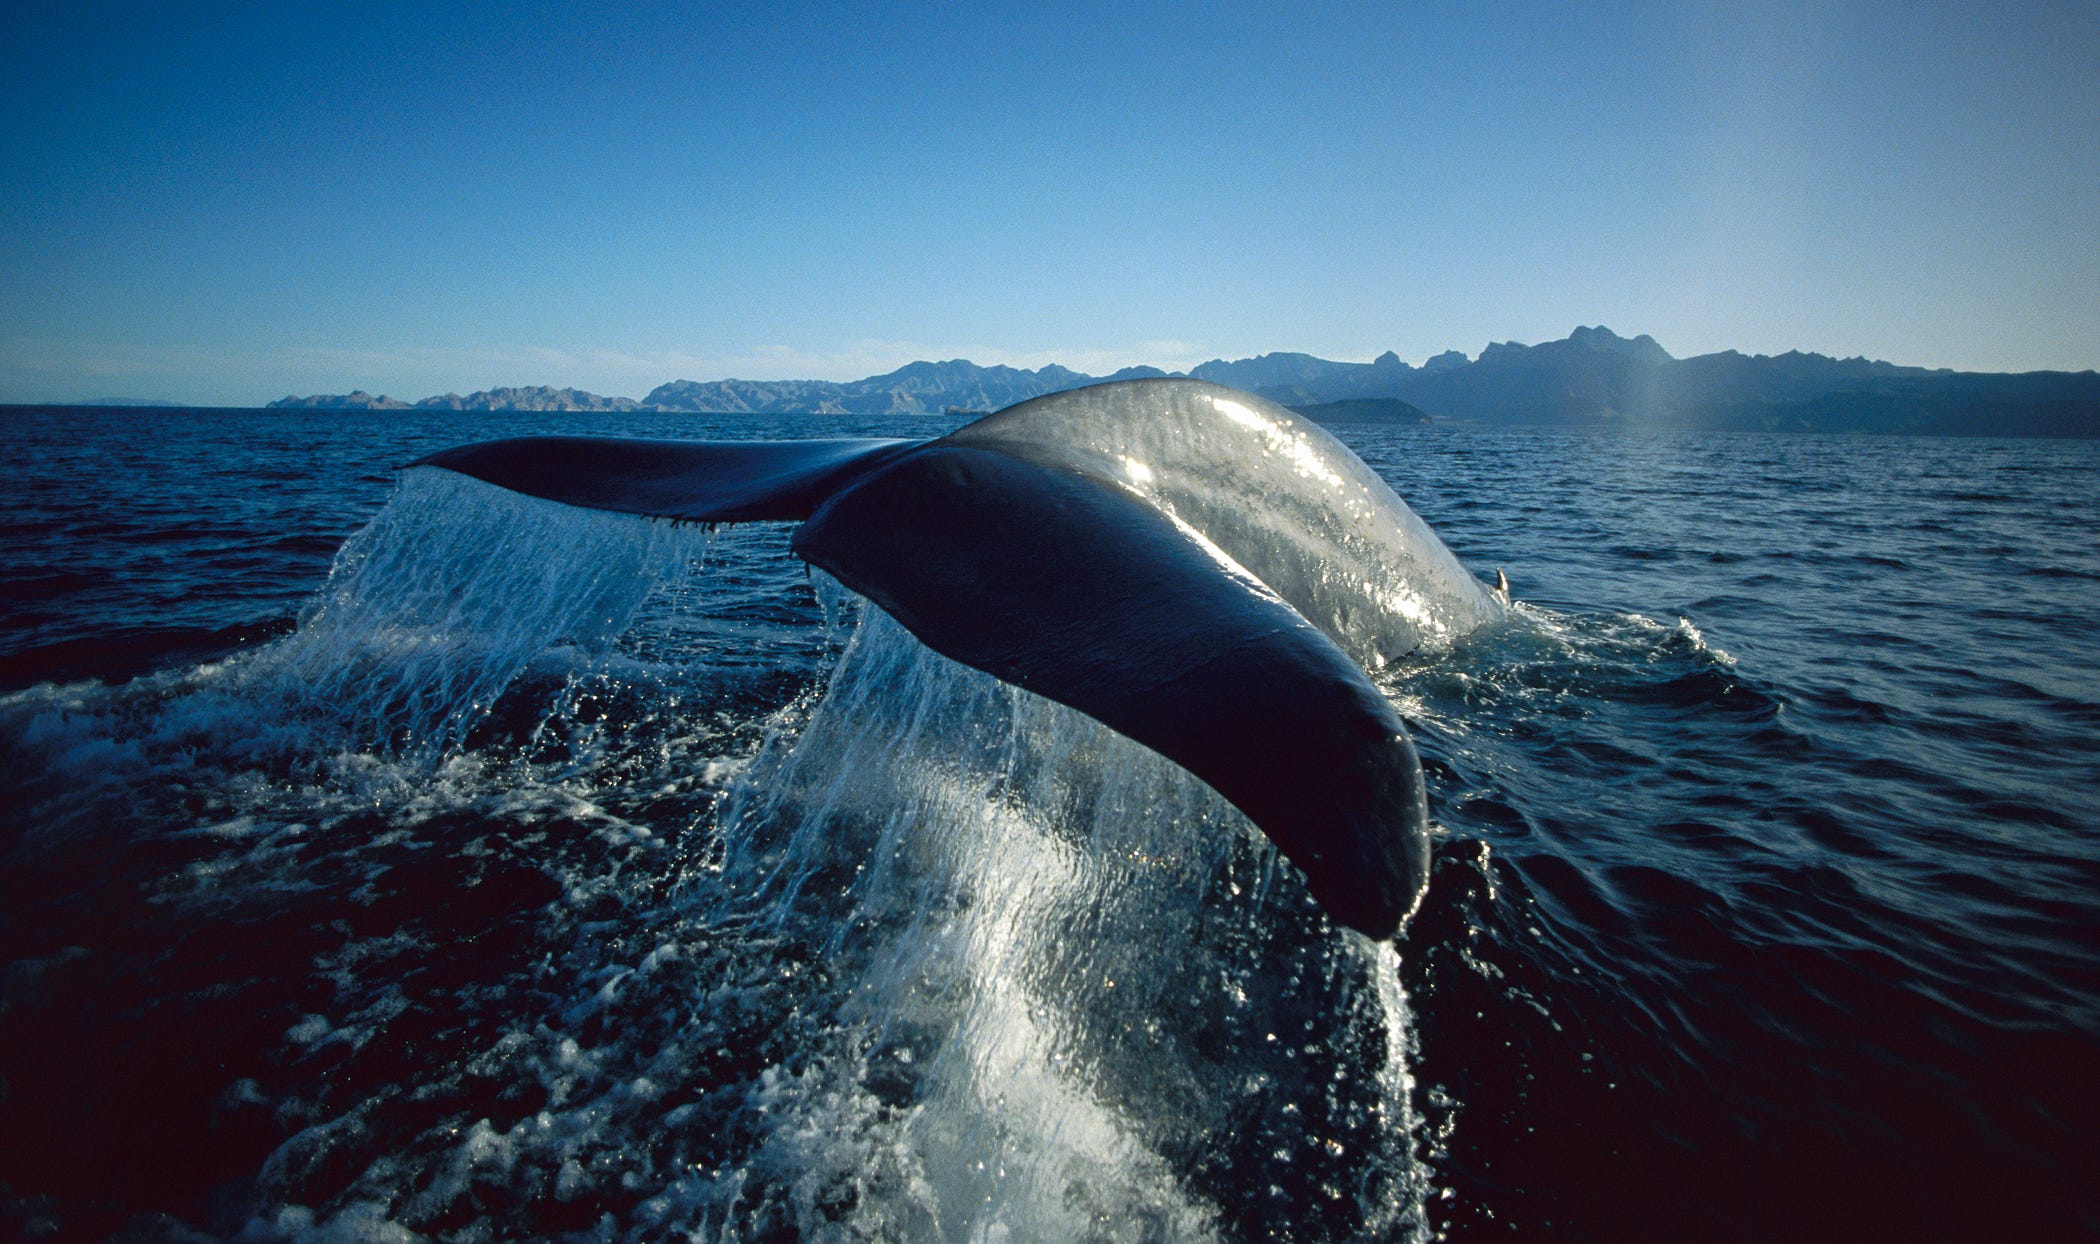 Capturing The Whale's Sensual Side: A Stunning Photo Collection